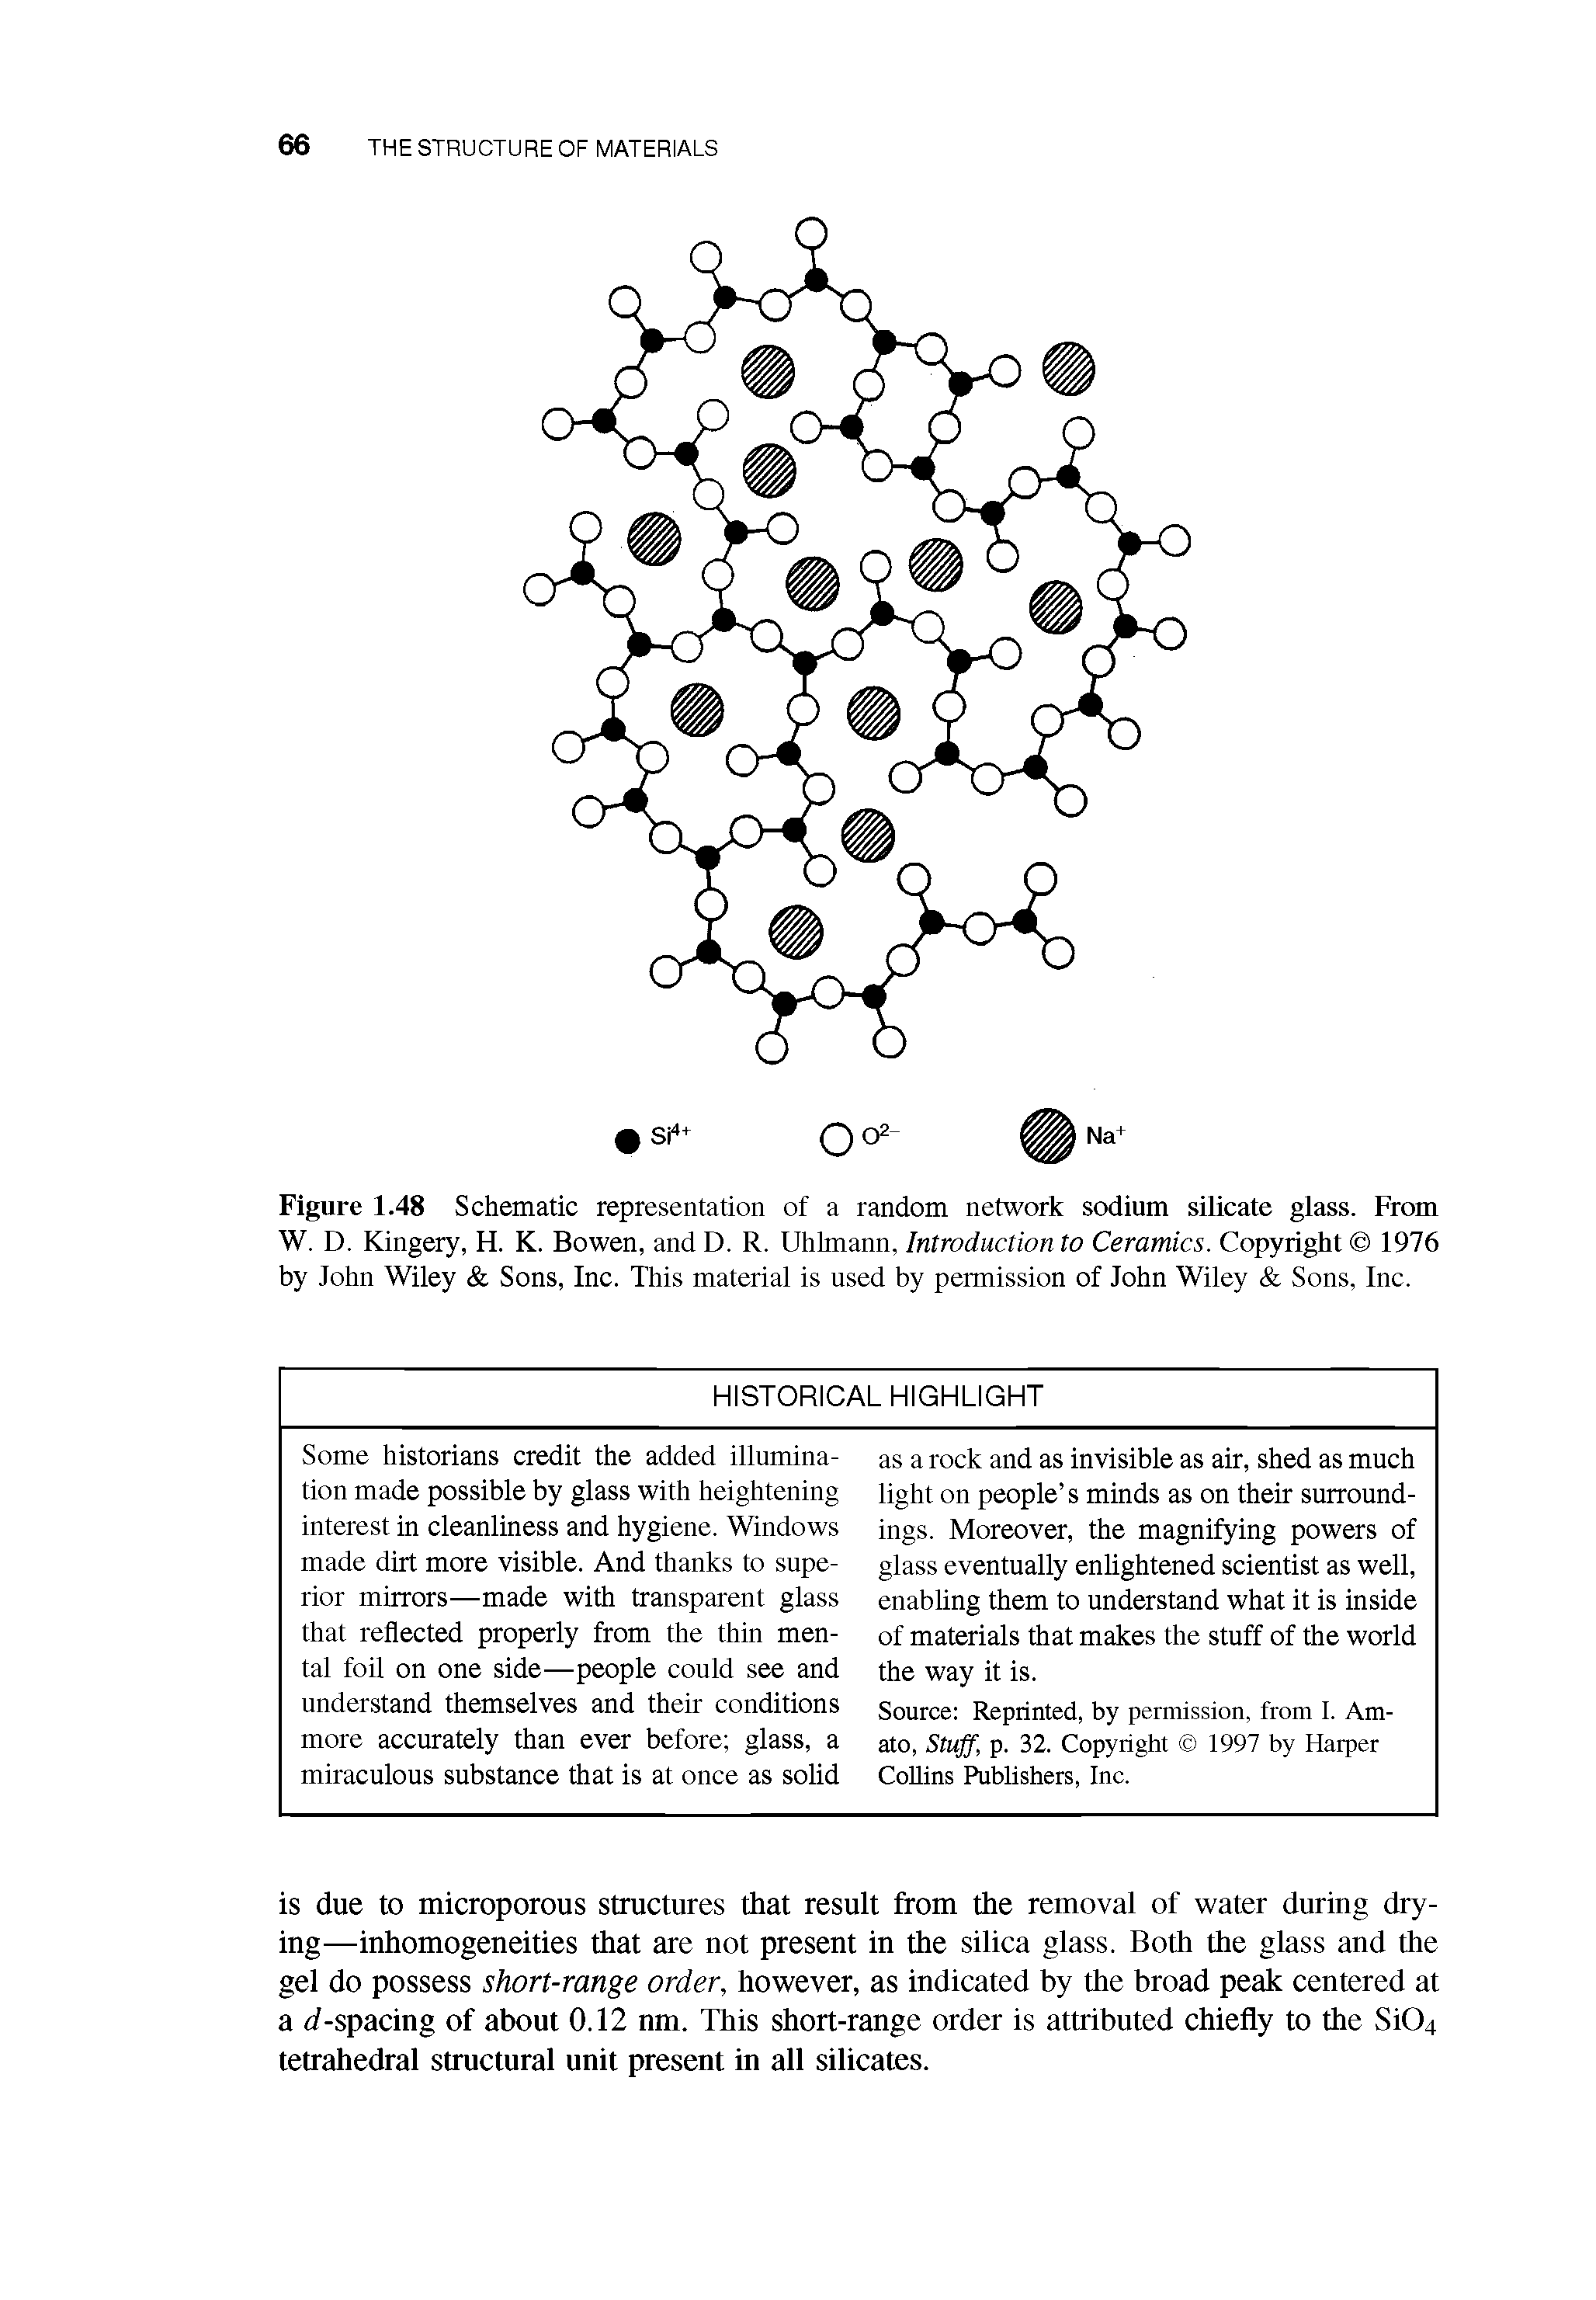 Figure 1.48 Schematic representation of a random network sodium silicate glass. From W. D. Kingery, H. K. Bowen, and D. R. Uhlmann, Introduction to Ceramics. Copyright 1976 by John Wiley Sons, Inc. This material is used by permission of John Wiley Sons, Inc.